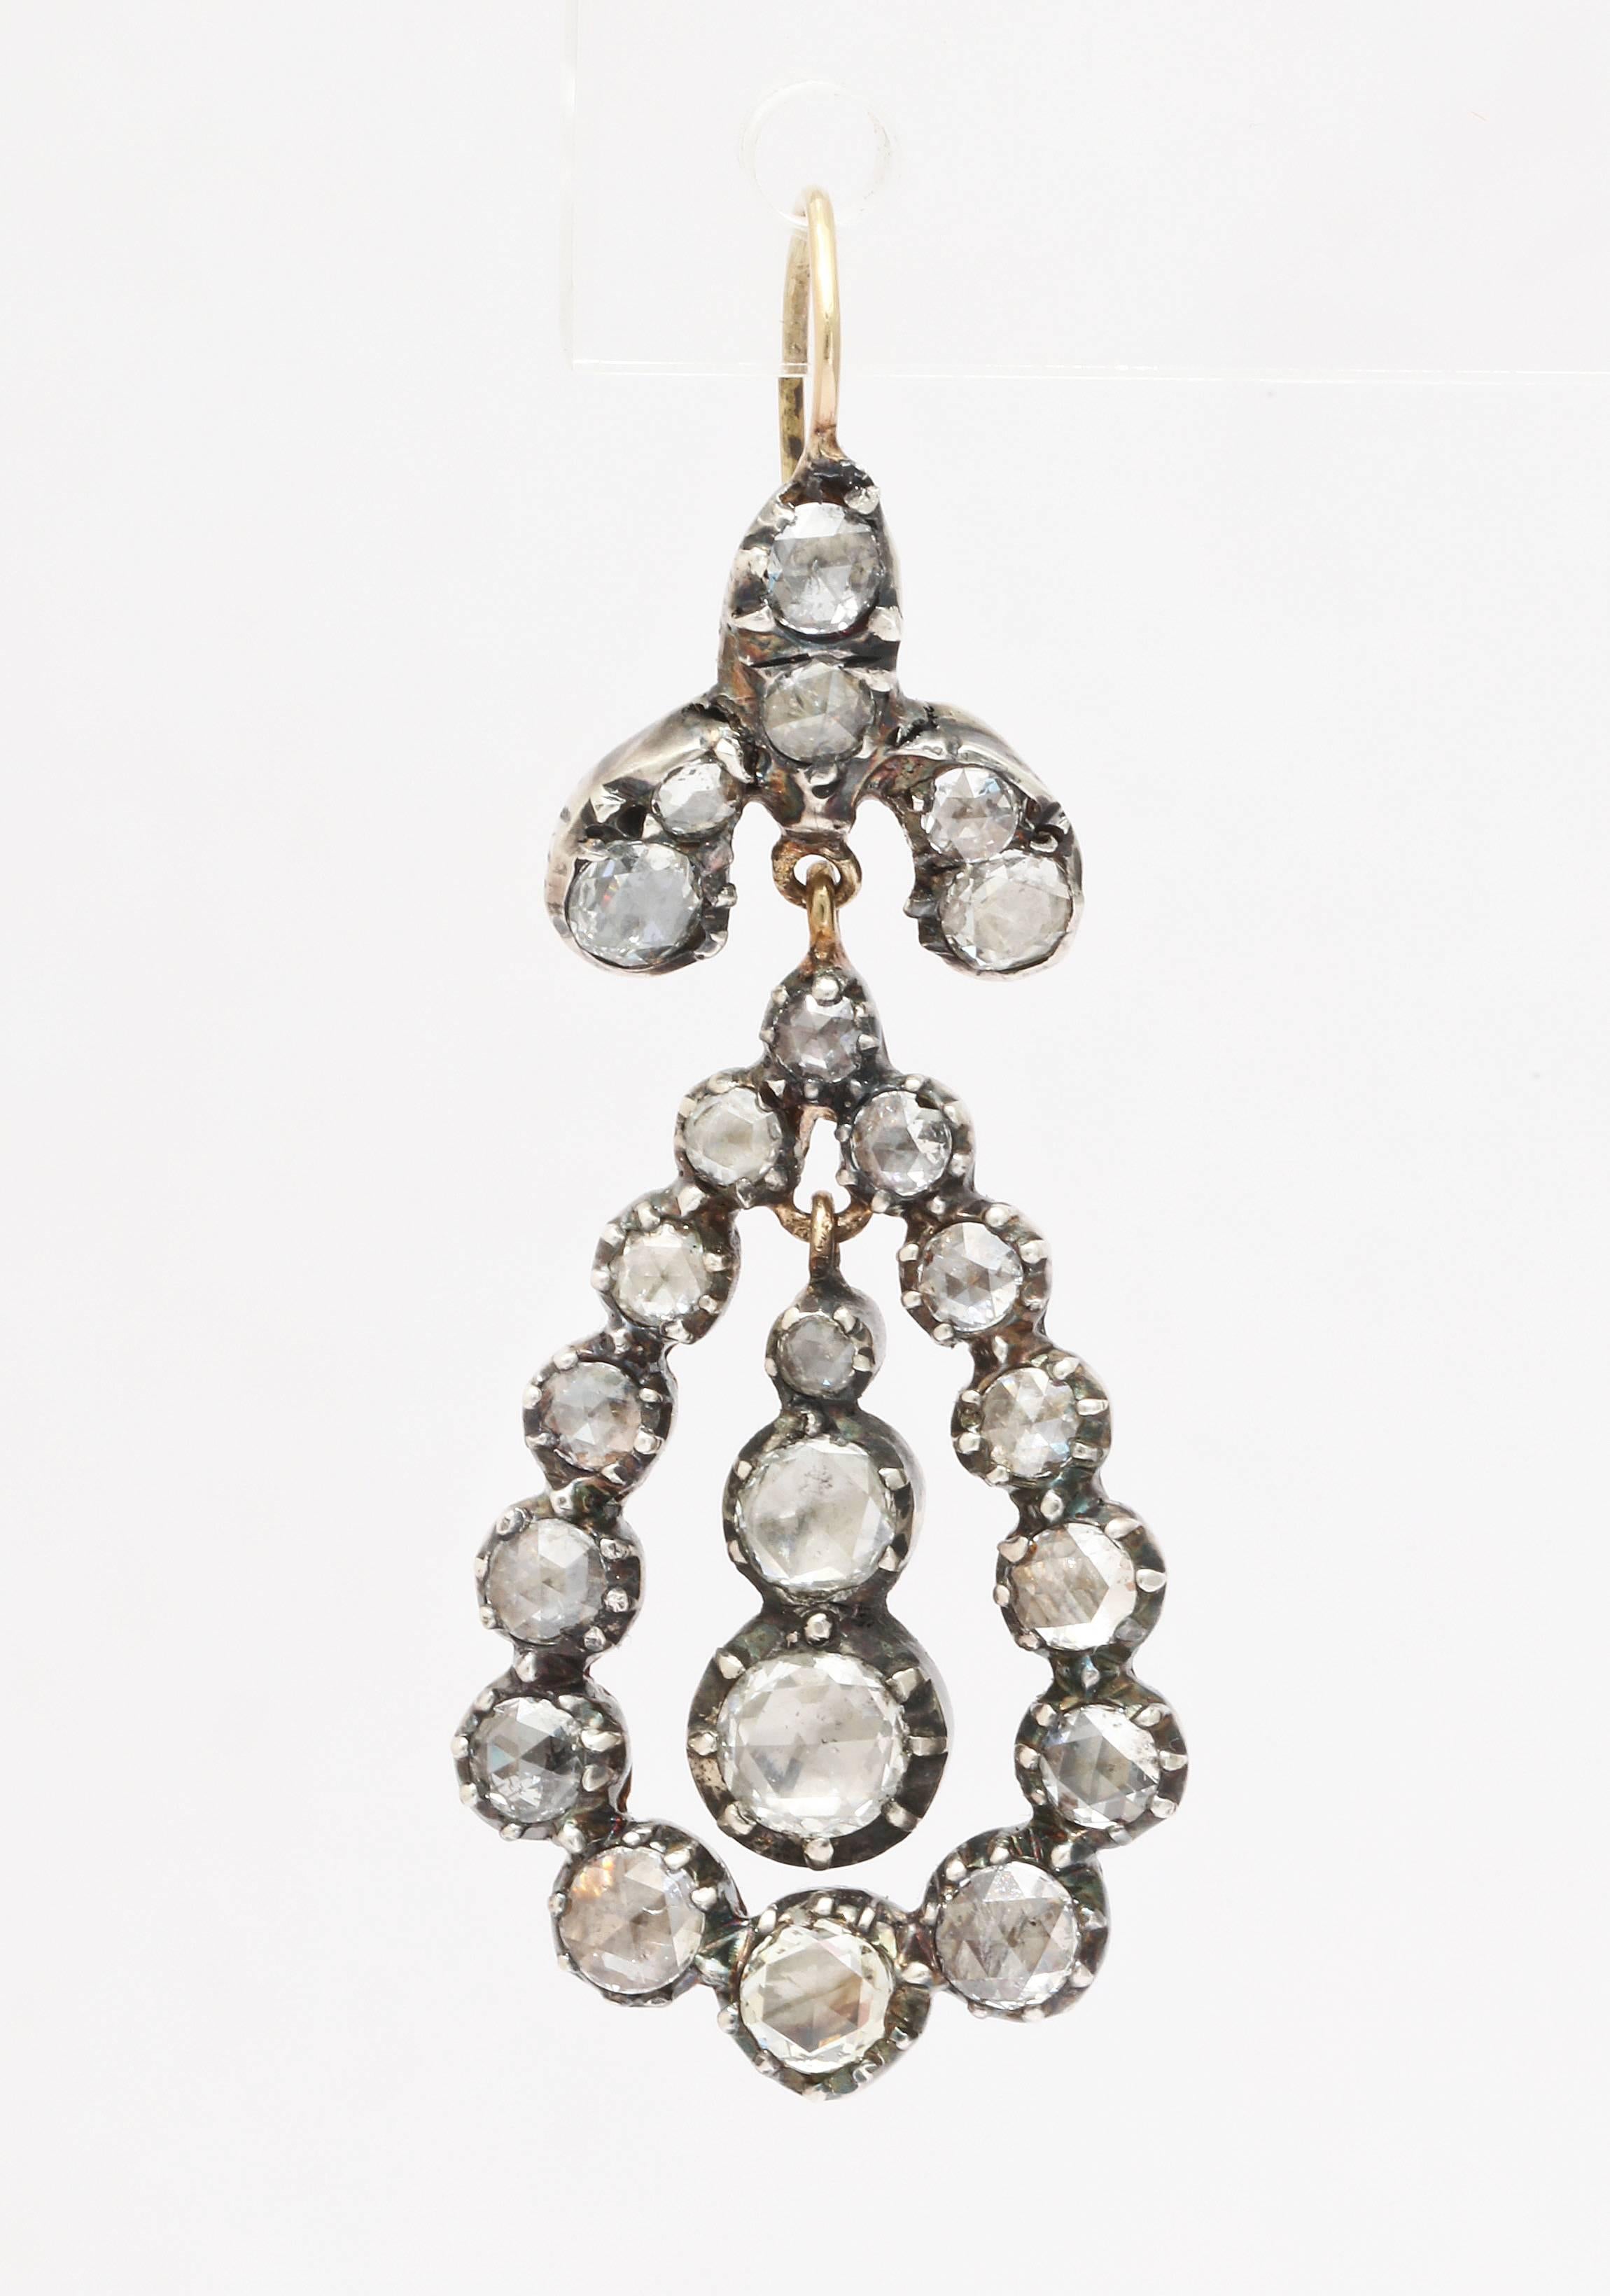 Perfect Georgian Revival Diamond earrings are just the right length to wear day or night, blue genes to evening. The gold is 15kt. The country of origin is the United Kingdom. The diamonds are foiled with their settings closed. This was the manner